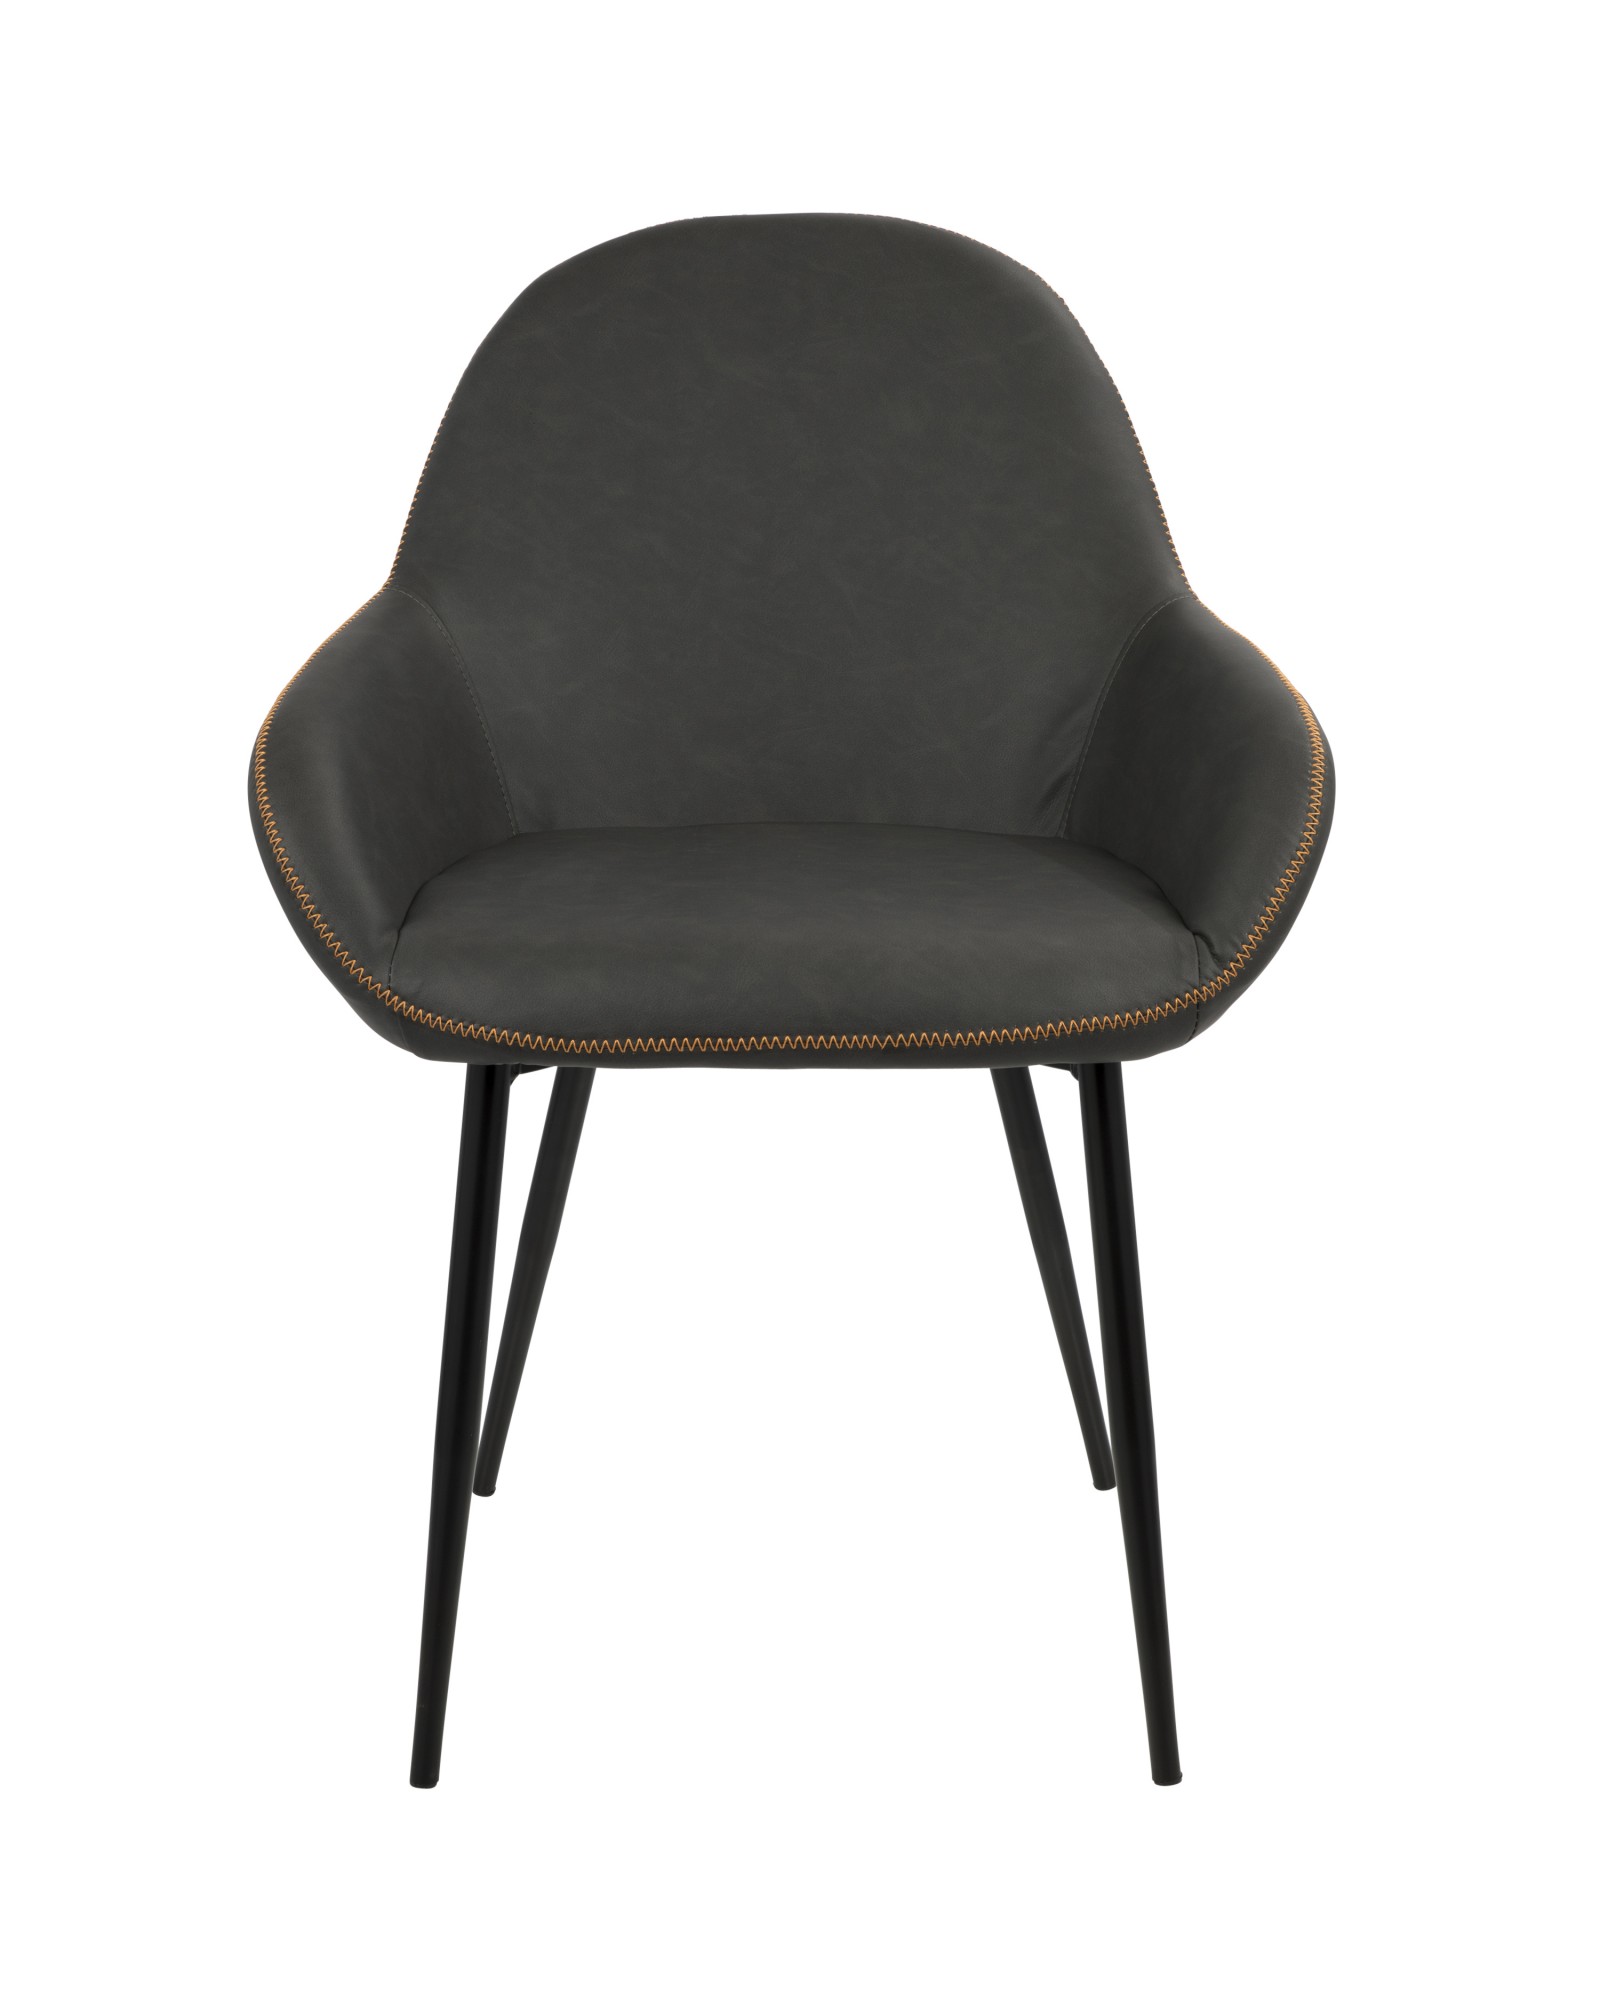 Clubhouse Contemporary Dining Chair in Black with Grey Vintage Faux Leather - Set of 2